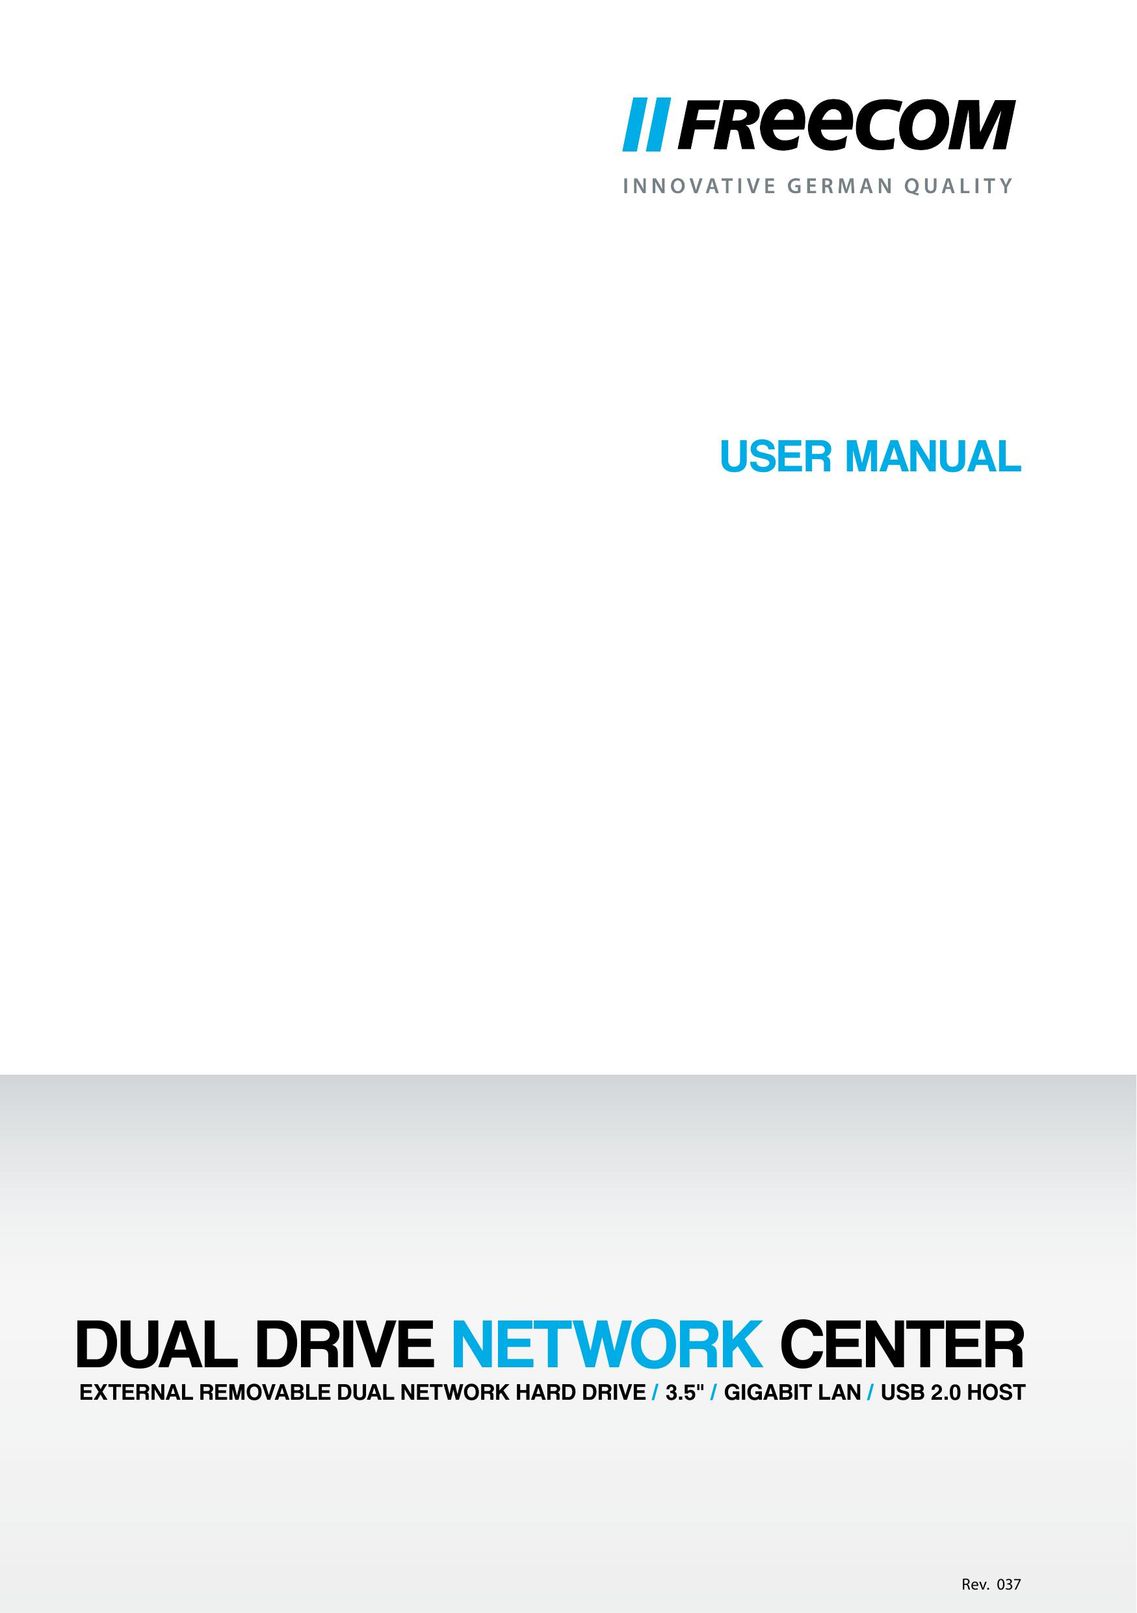 Freecom Technologies Dual Drive Network Center Network Cables User Manual